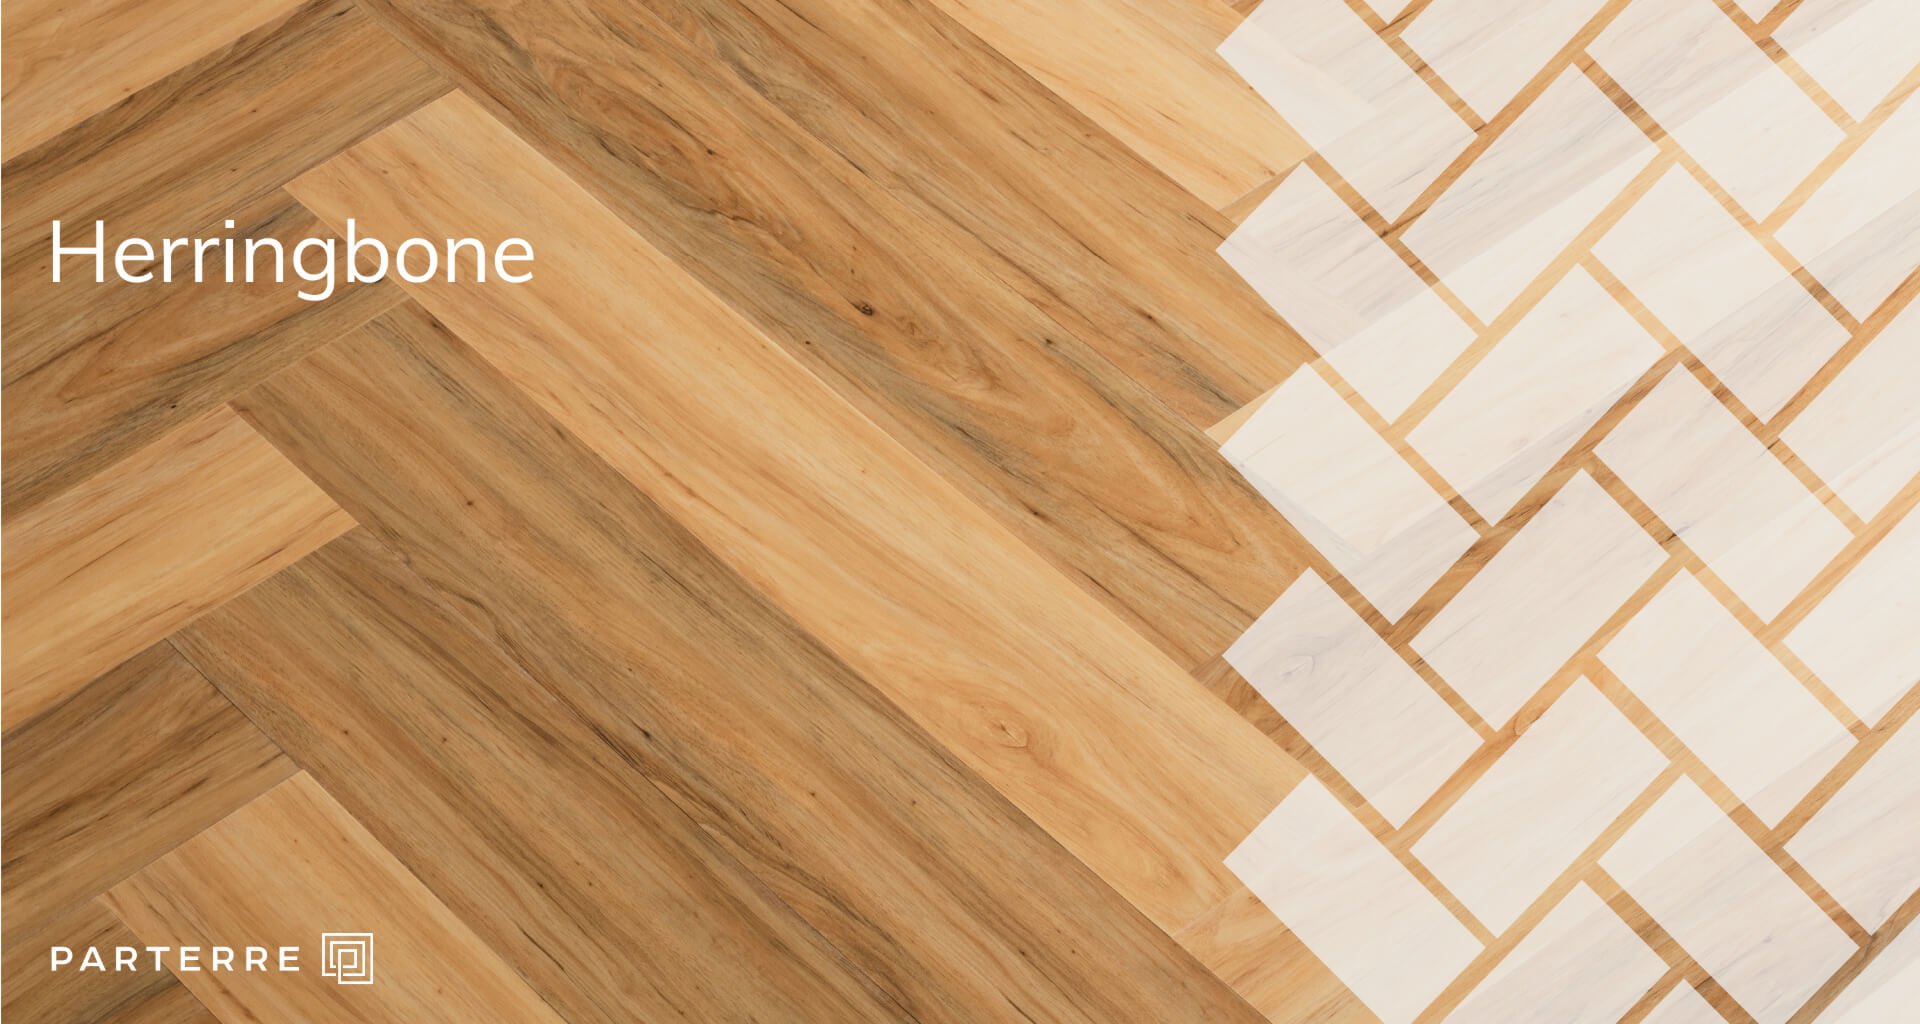 9 Vinyl Flooring Patterns For Your Next, Can You Install Vinyl Plank Flooring In A Herringbone Pattern